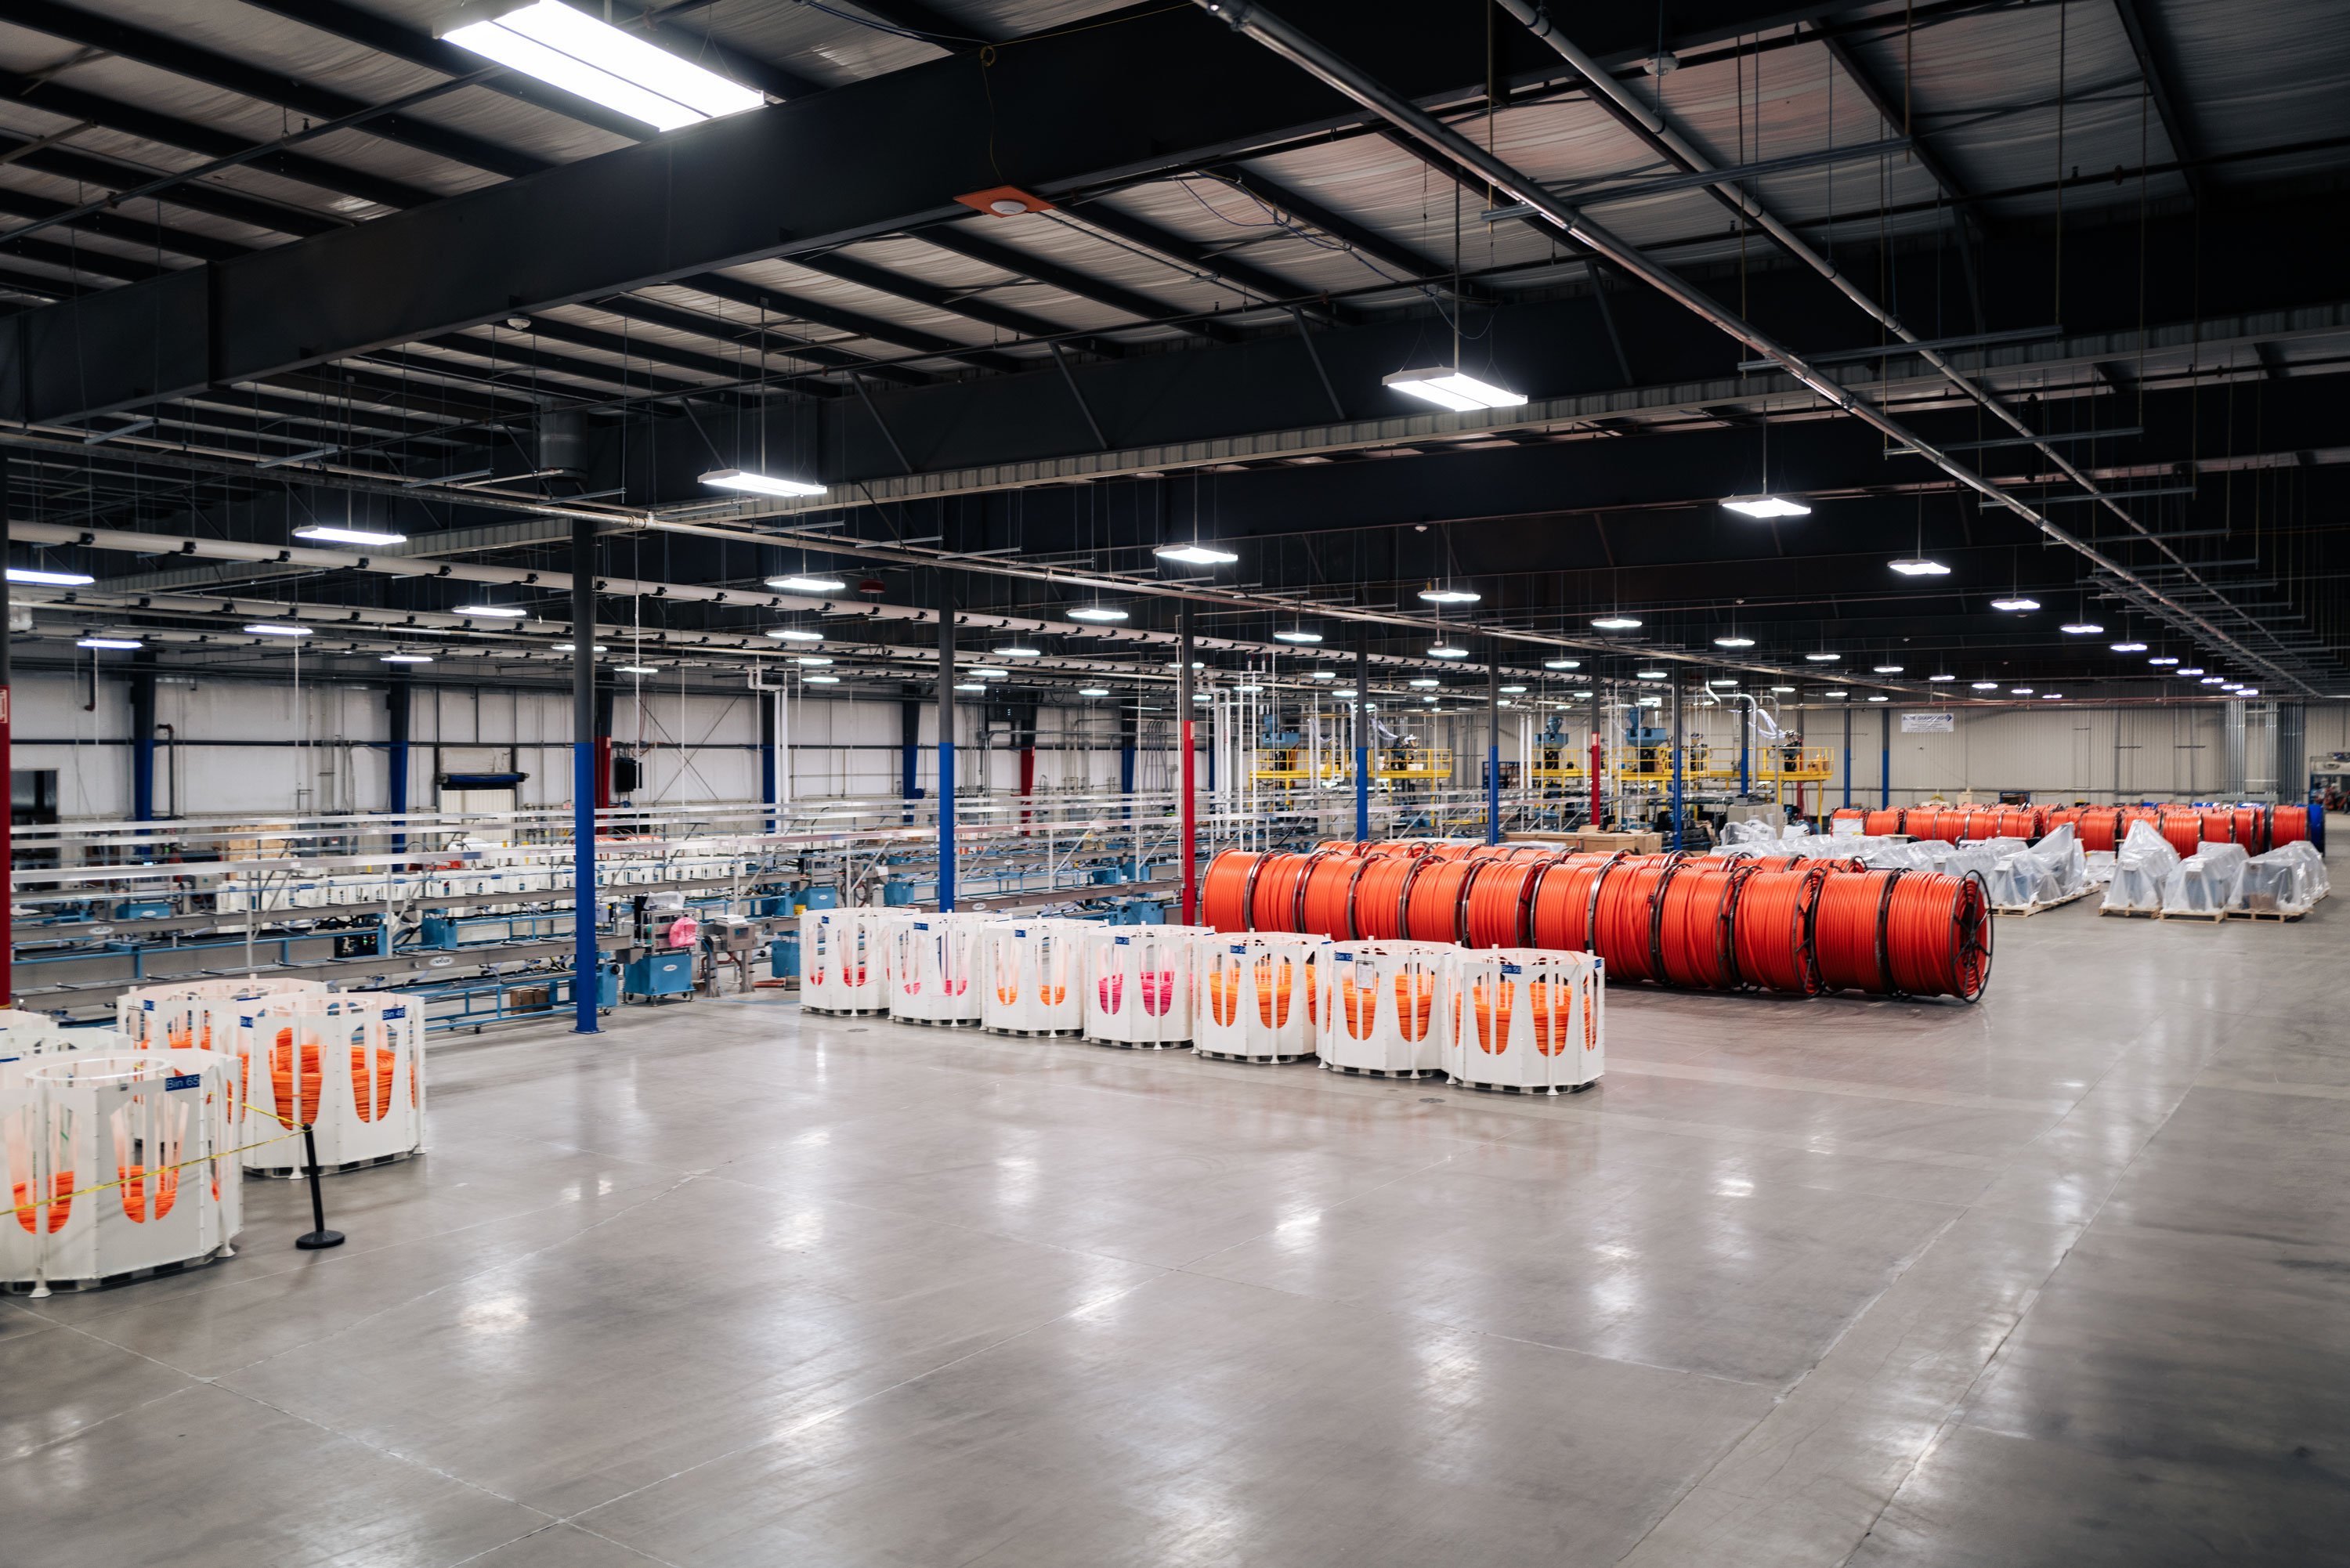 This is a well-lit warehouse with rows of large spools with orange micro duct. There are no people visible in this image.